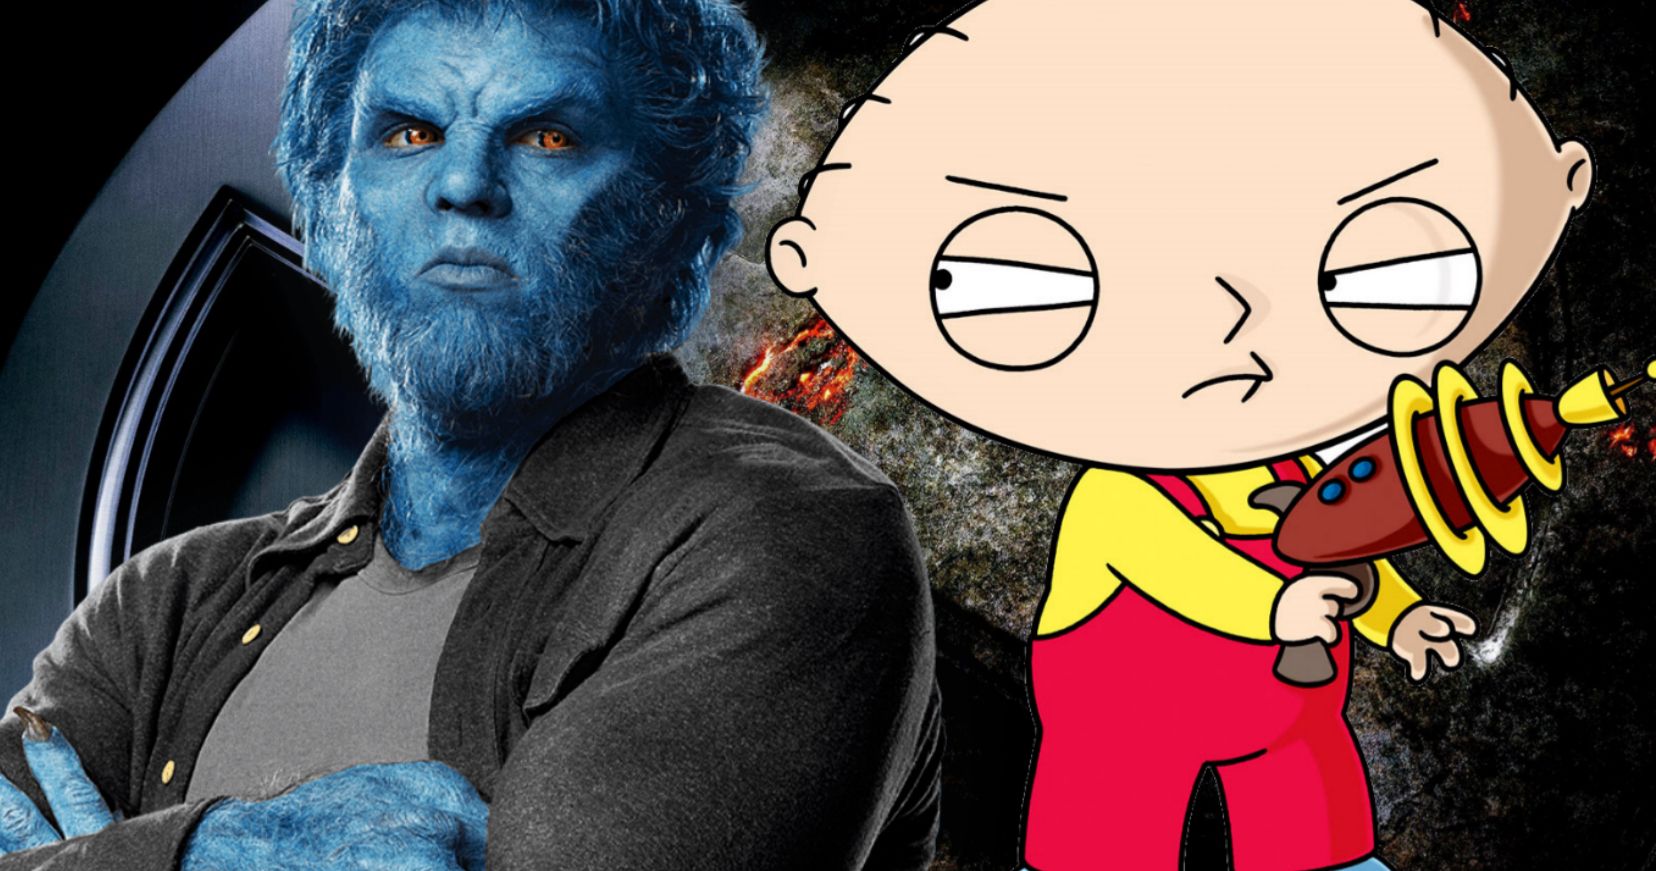 Nicholas Hoult Had to Imitate Stewie from Family Guy to Win X-Men Role